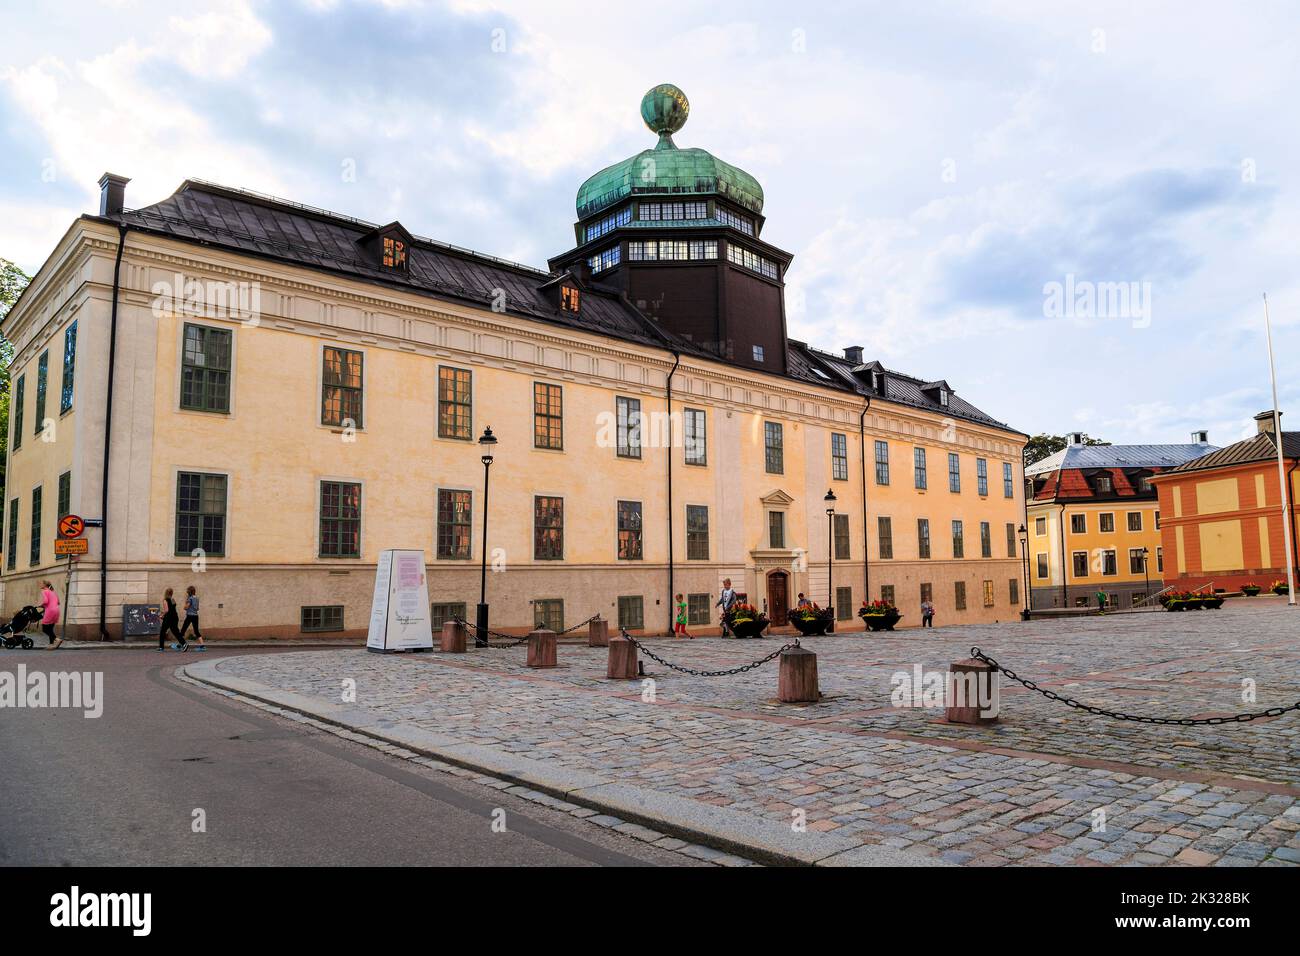 UPPSALA, SWEDEN - JULY 7, 2016: Gustavianum is a former university building from the XVII century, it is now a university museum. Stock Photo